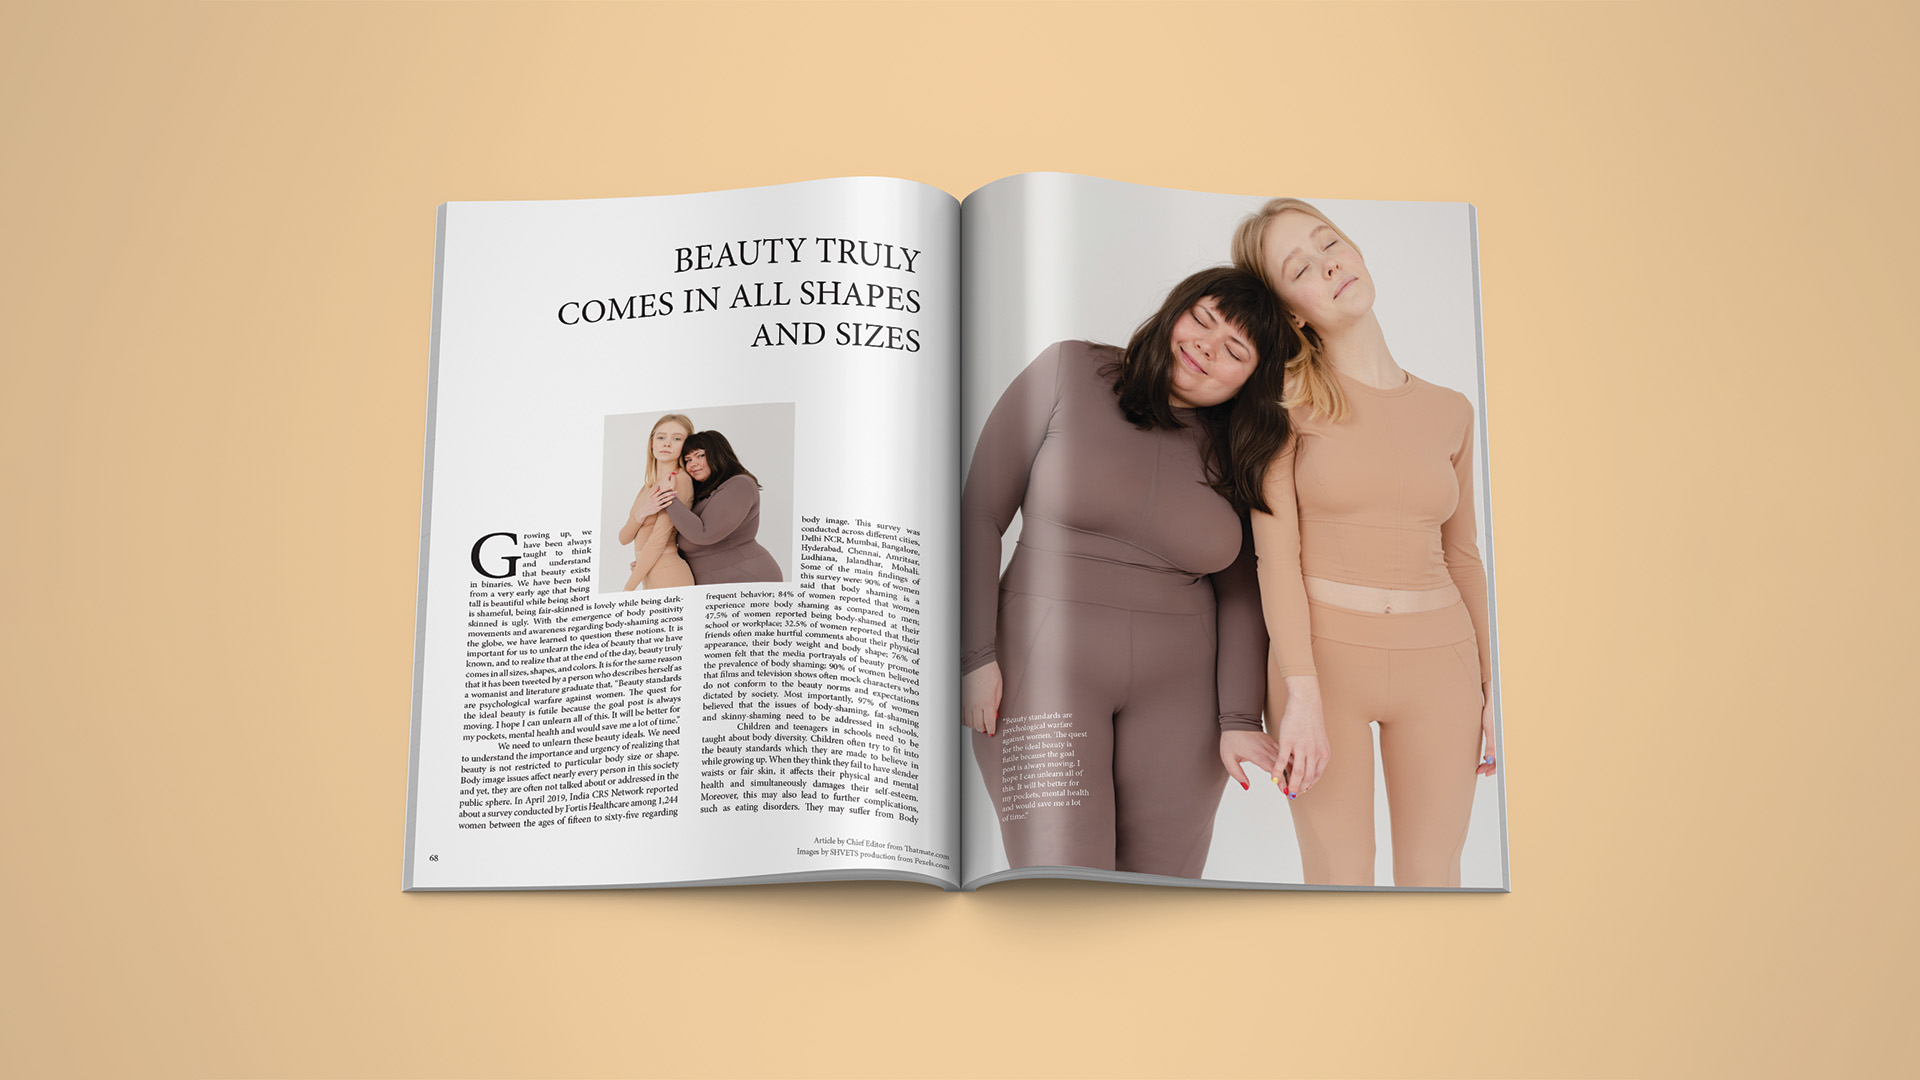 Vogue Magazine Spread Design / Vogue Magazine Spread Design, 8.5″ x 11″ / spread, 2022.This spread is from Typography II, I had to pick a magazine that I liked and design a spread that looks like it actually belongs in. I chose Vogue and the article I found was about body positivity.